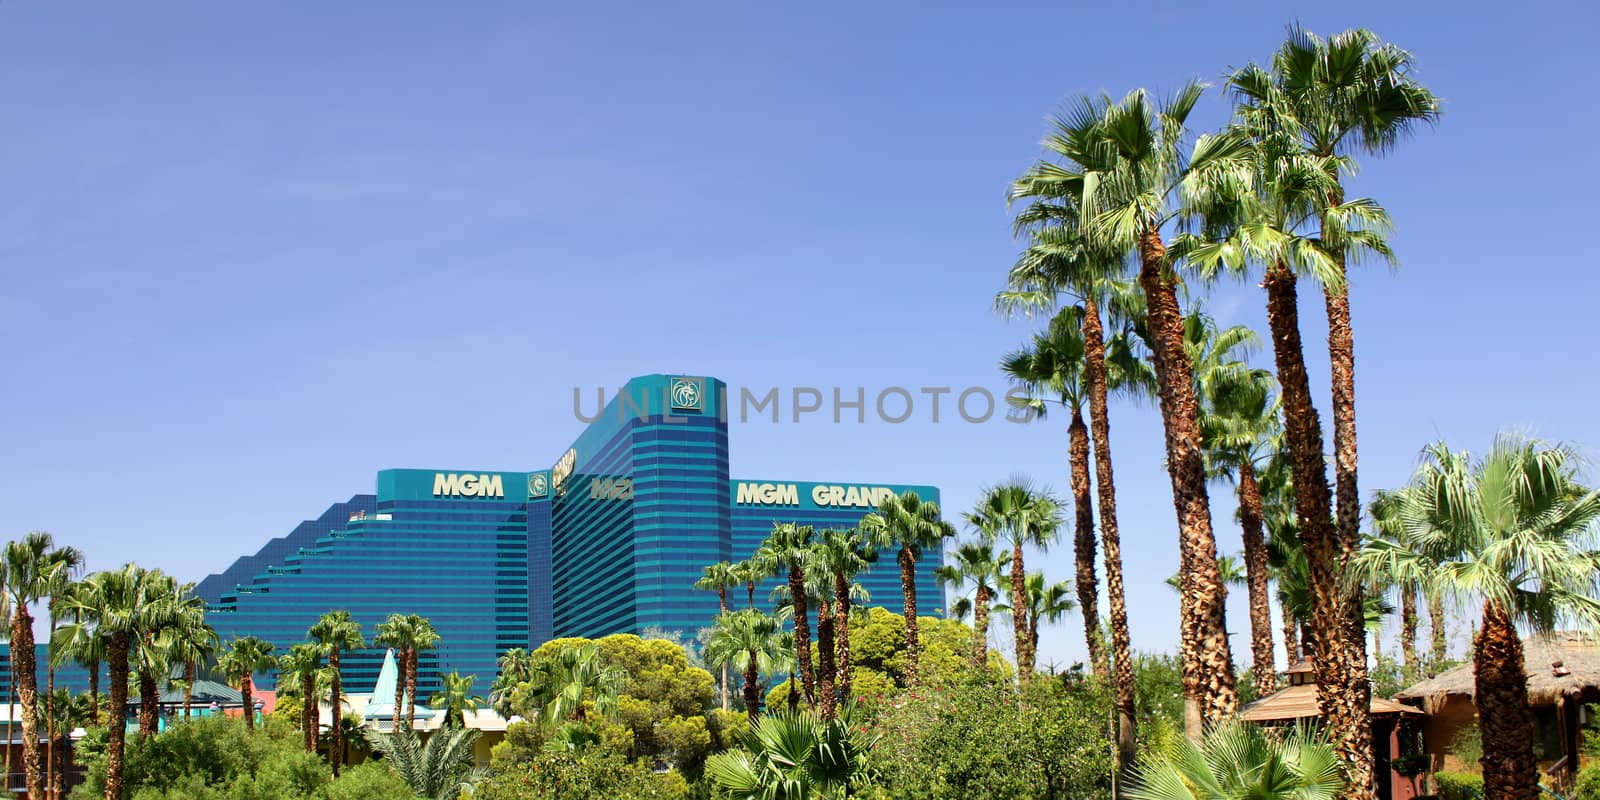 MGM Grand Hotel and Casino by Wirepec